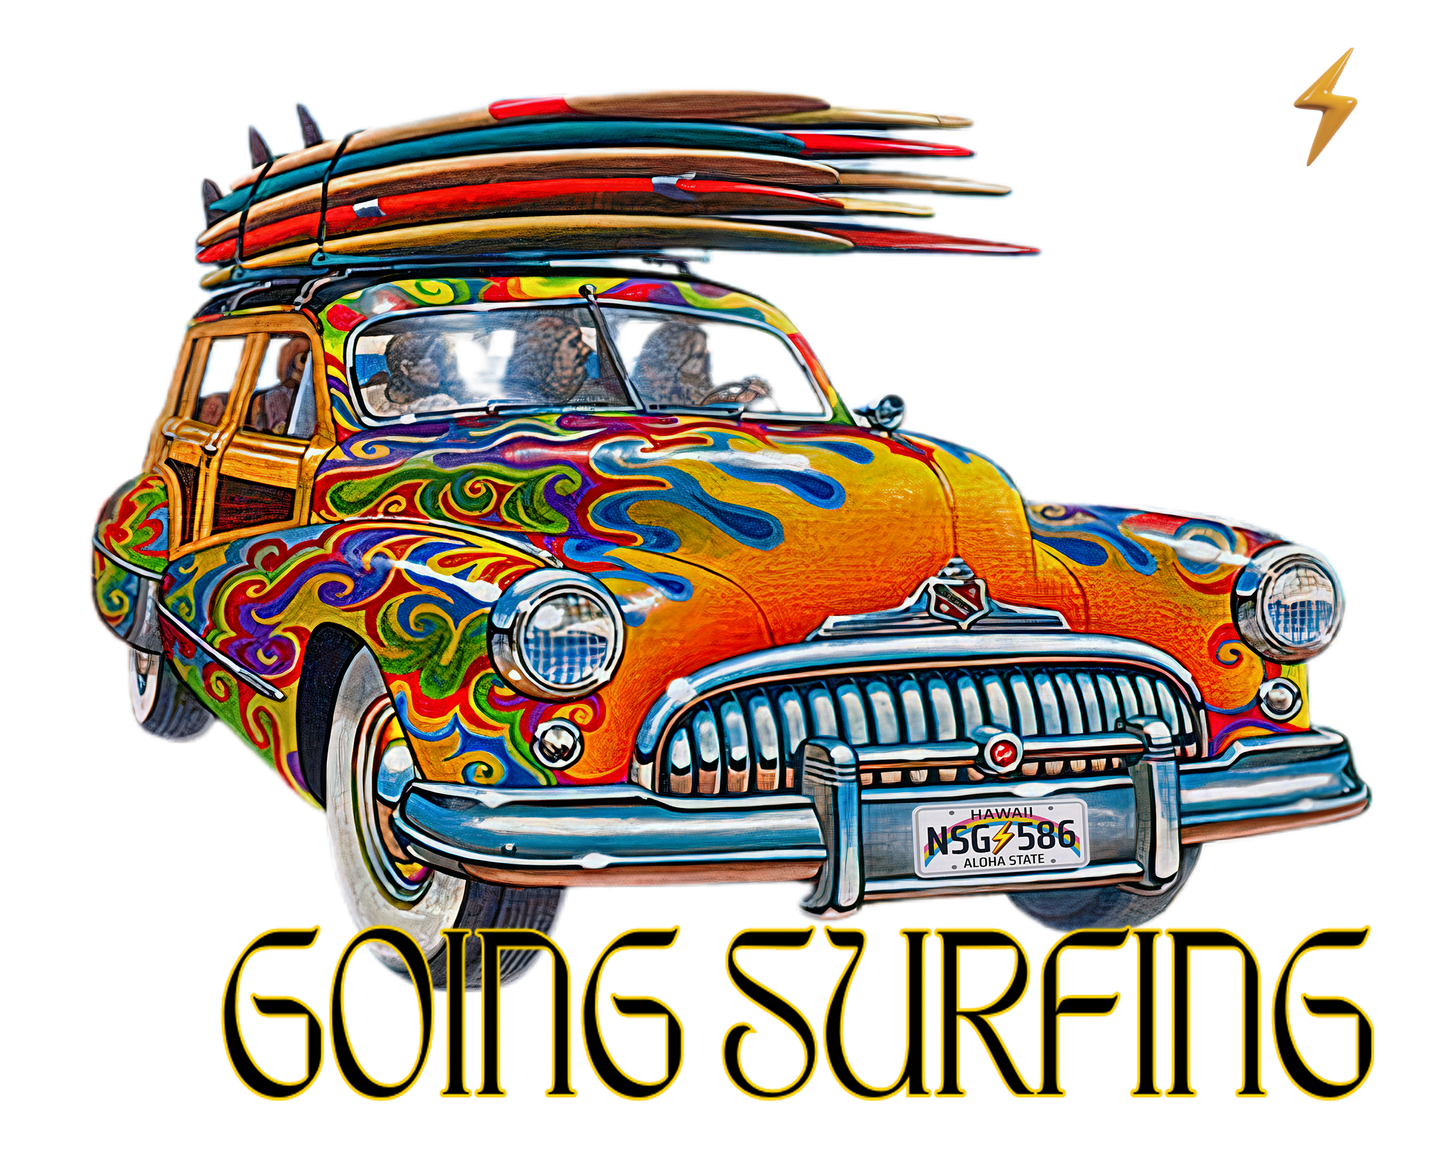 GOING SURFING